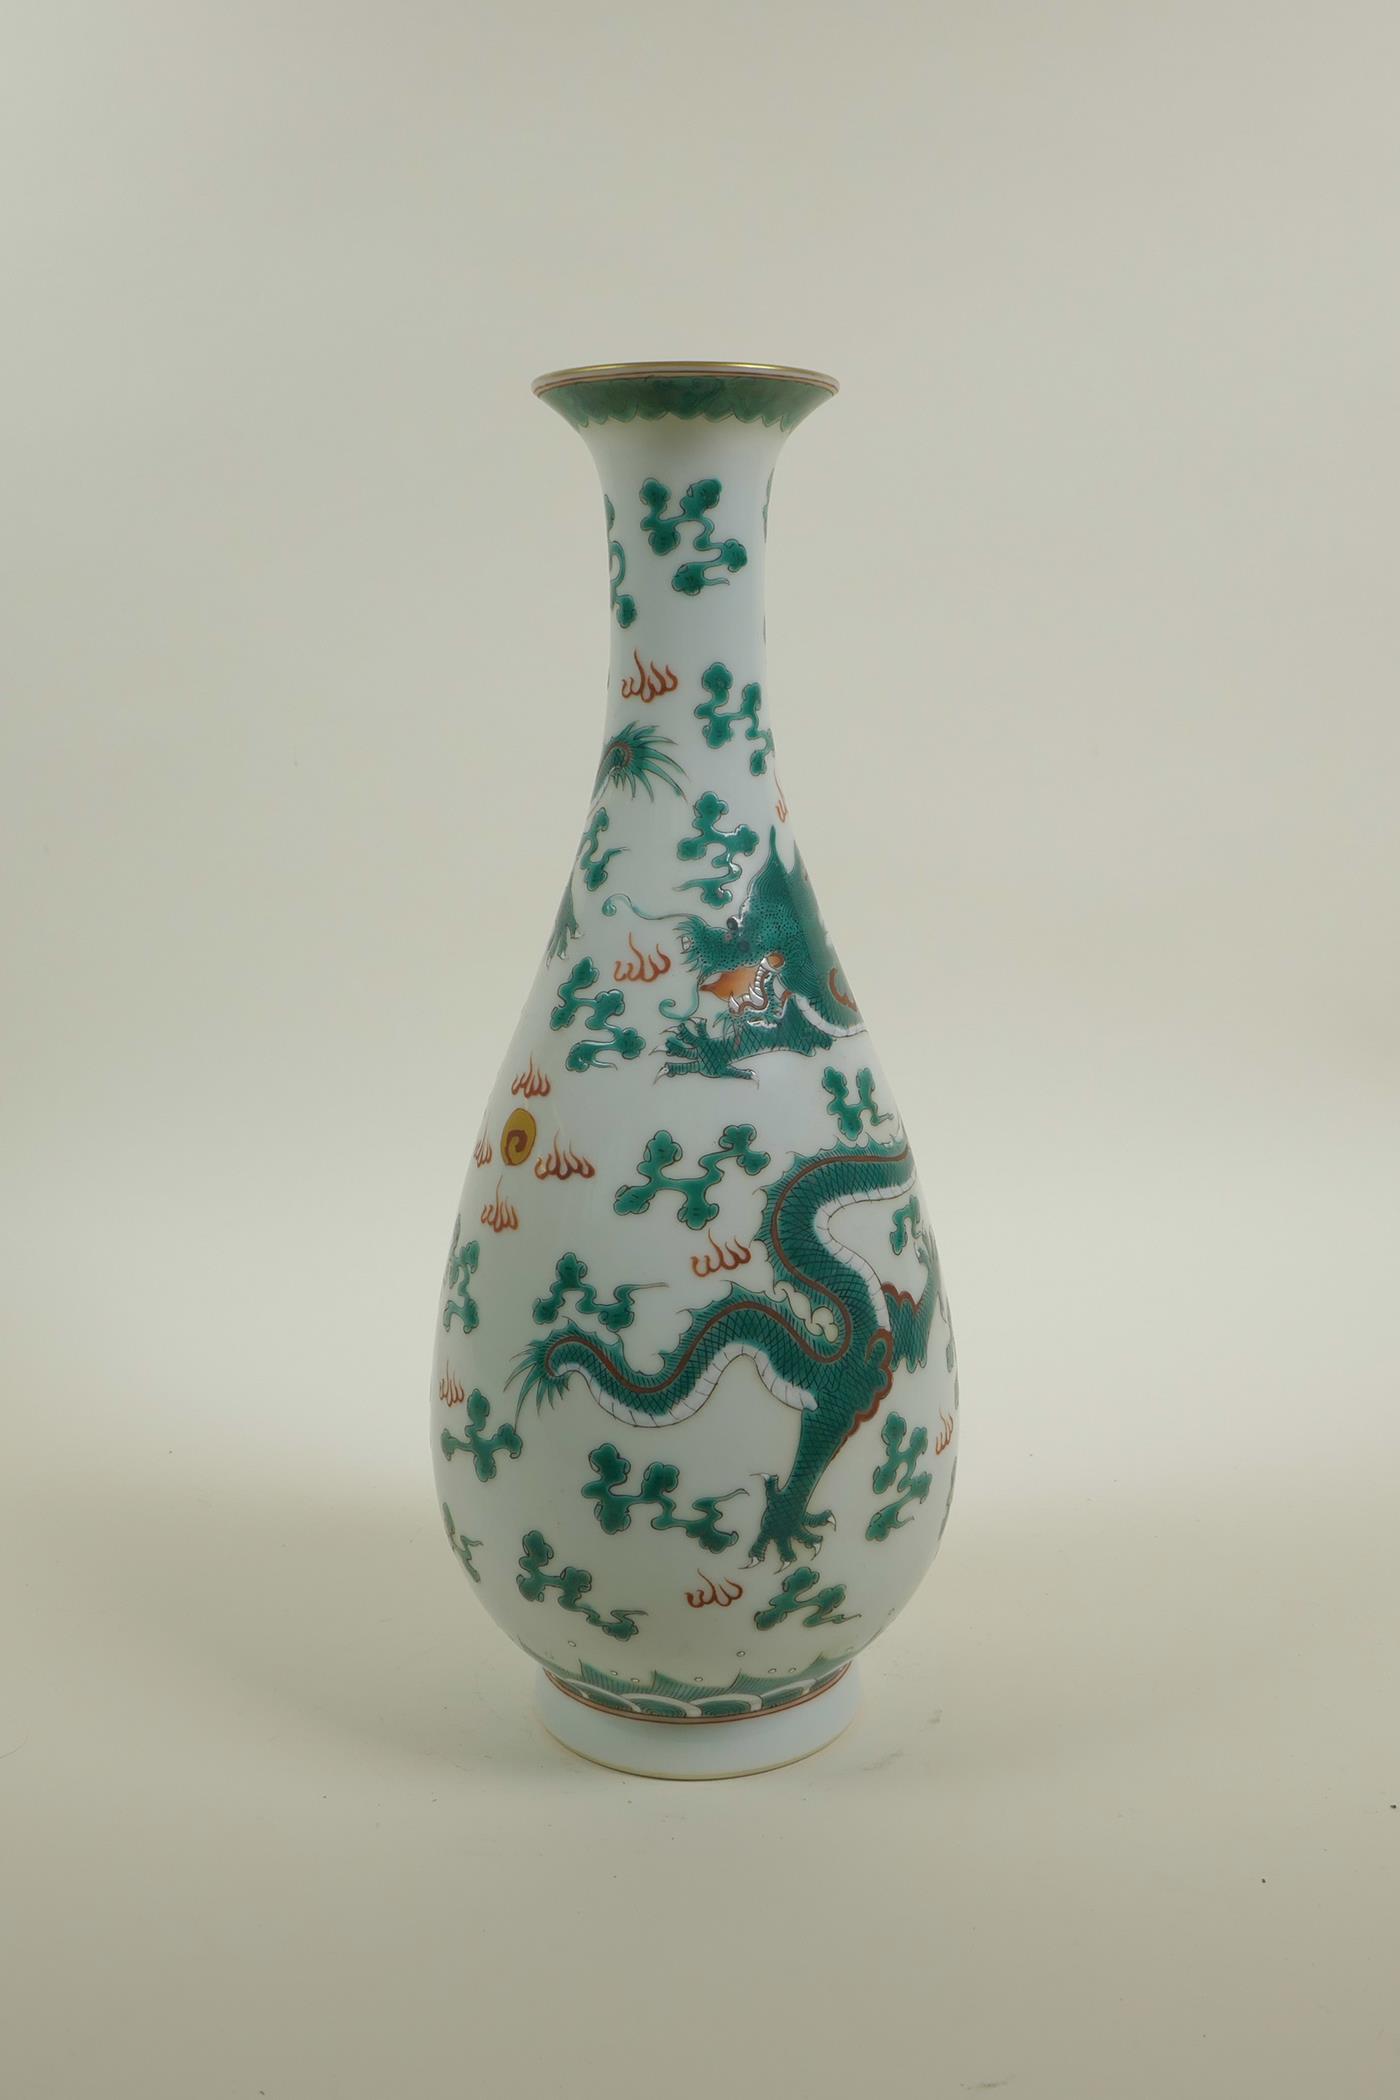 A Chinese late C19th/early C20th slender necked porcelain vase decorated with green enamel dragons - Image 2 of 4